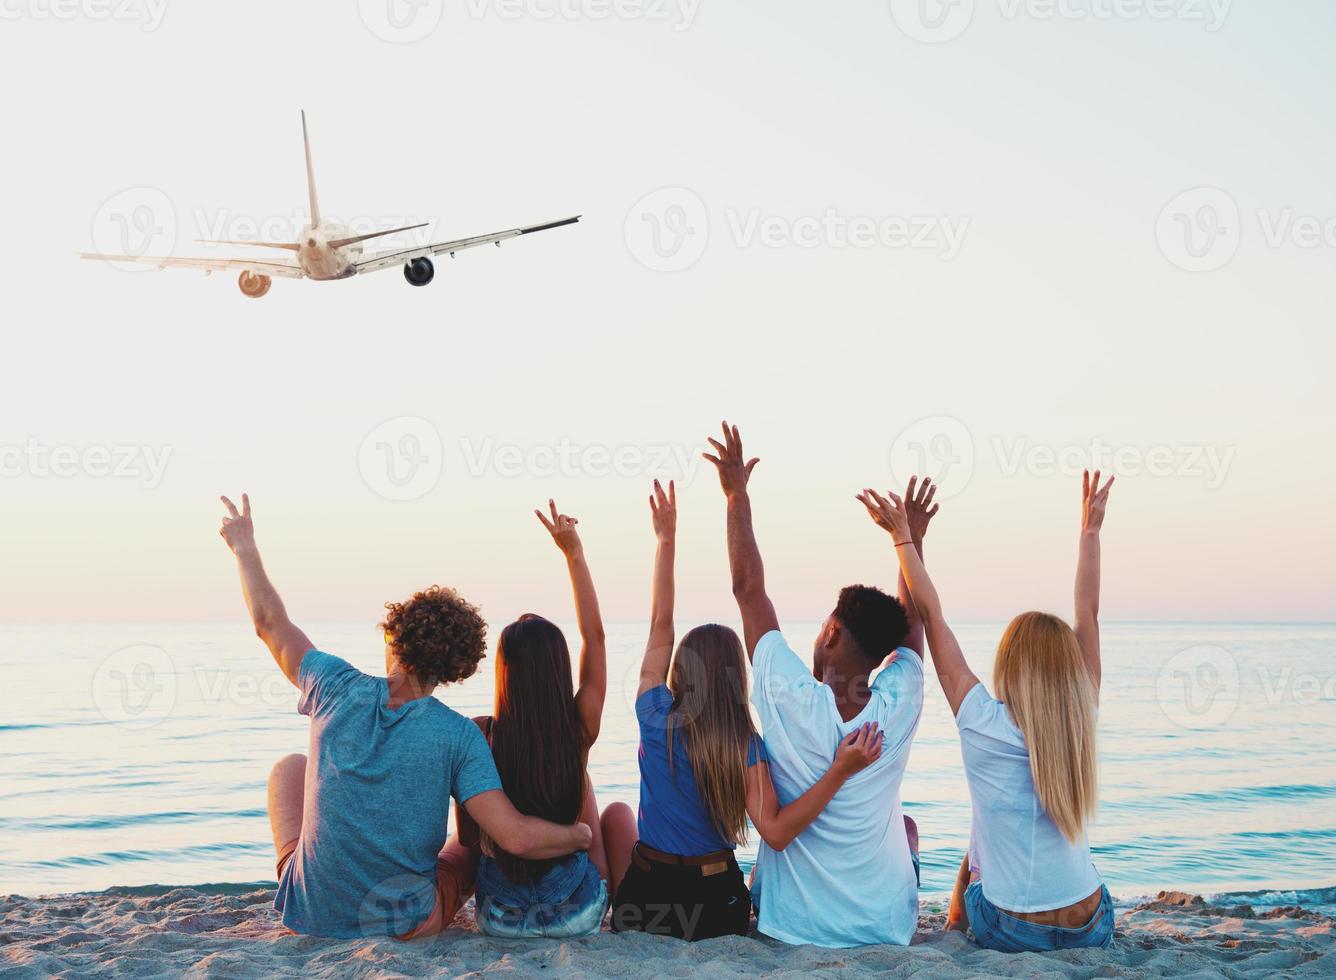 Group of friends having fun on the beach with flying aircraft photo